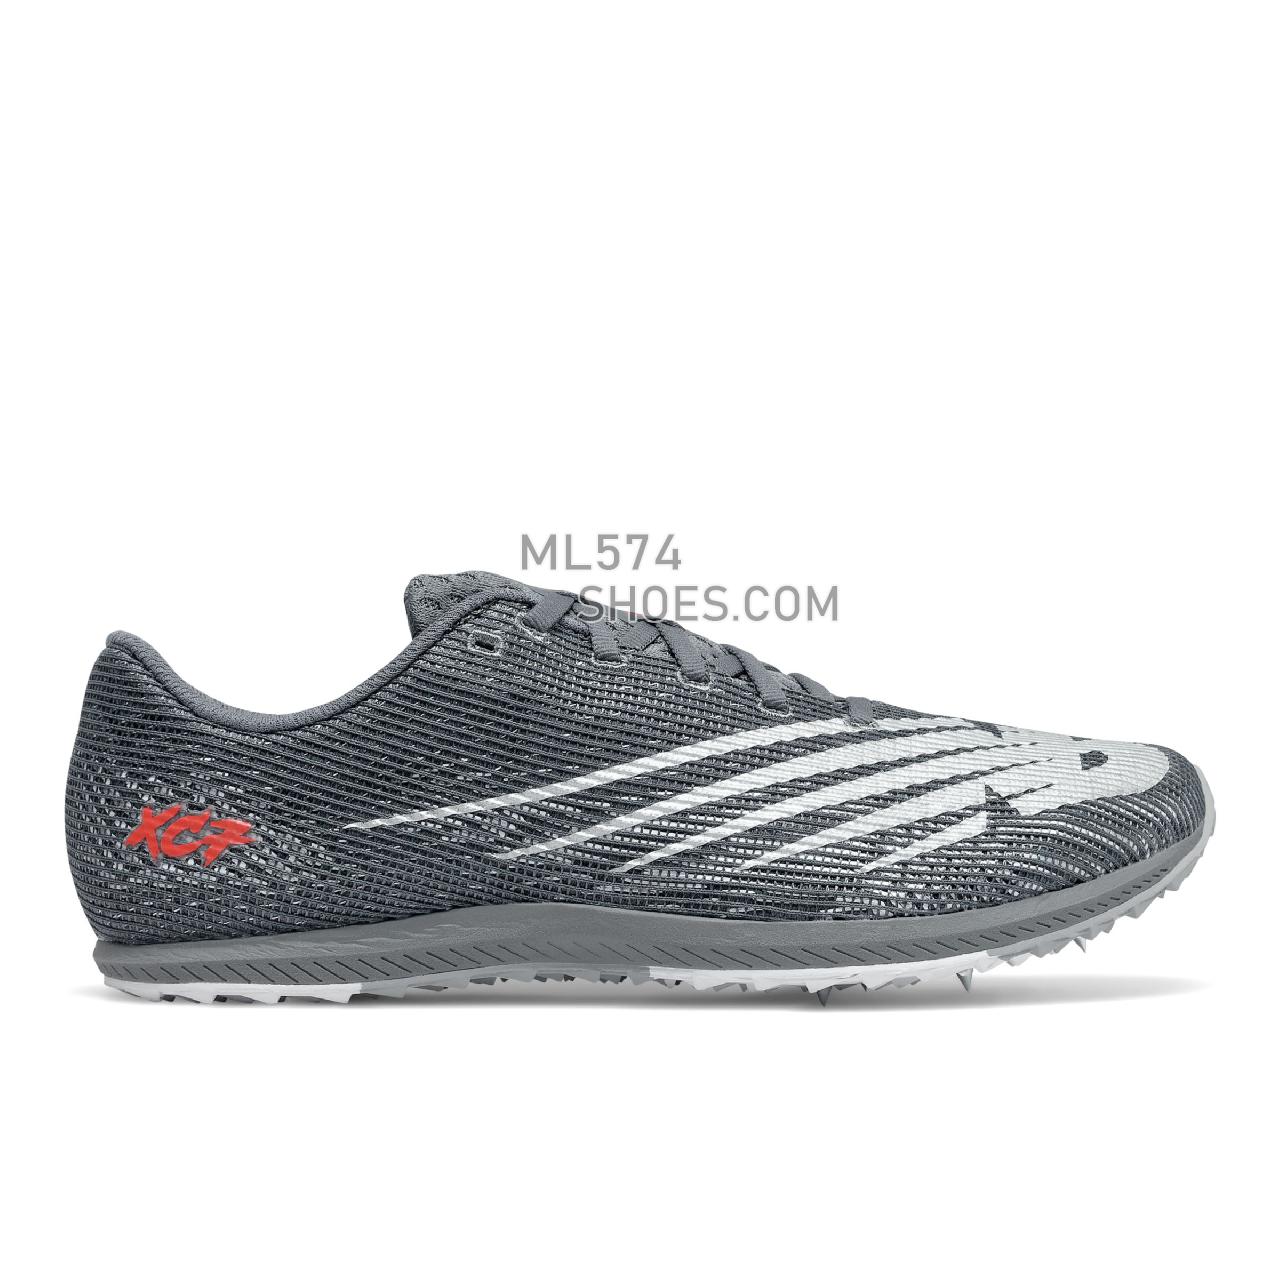 New Balance XC Seven v3 - Unisex Men's Women's Competition Running - Lead with Silver Metallic - UXCS7GS3